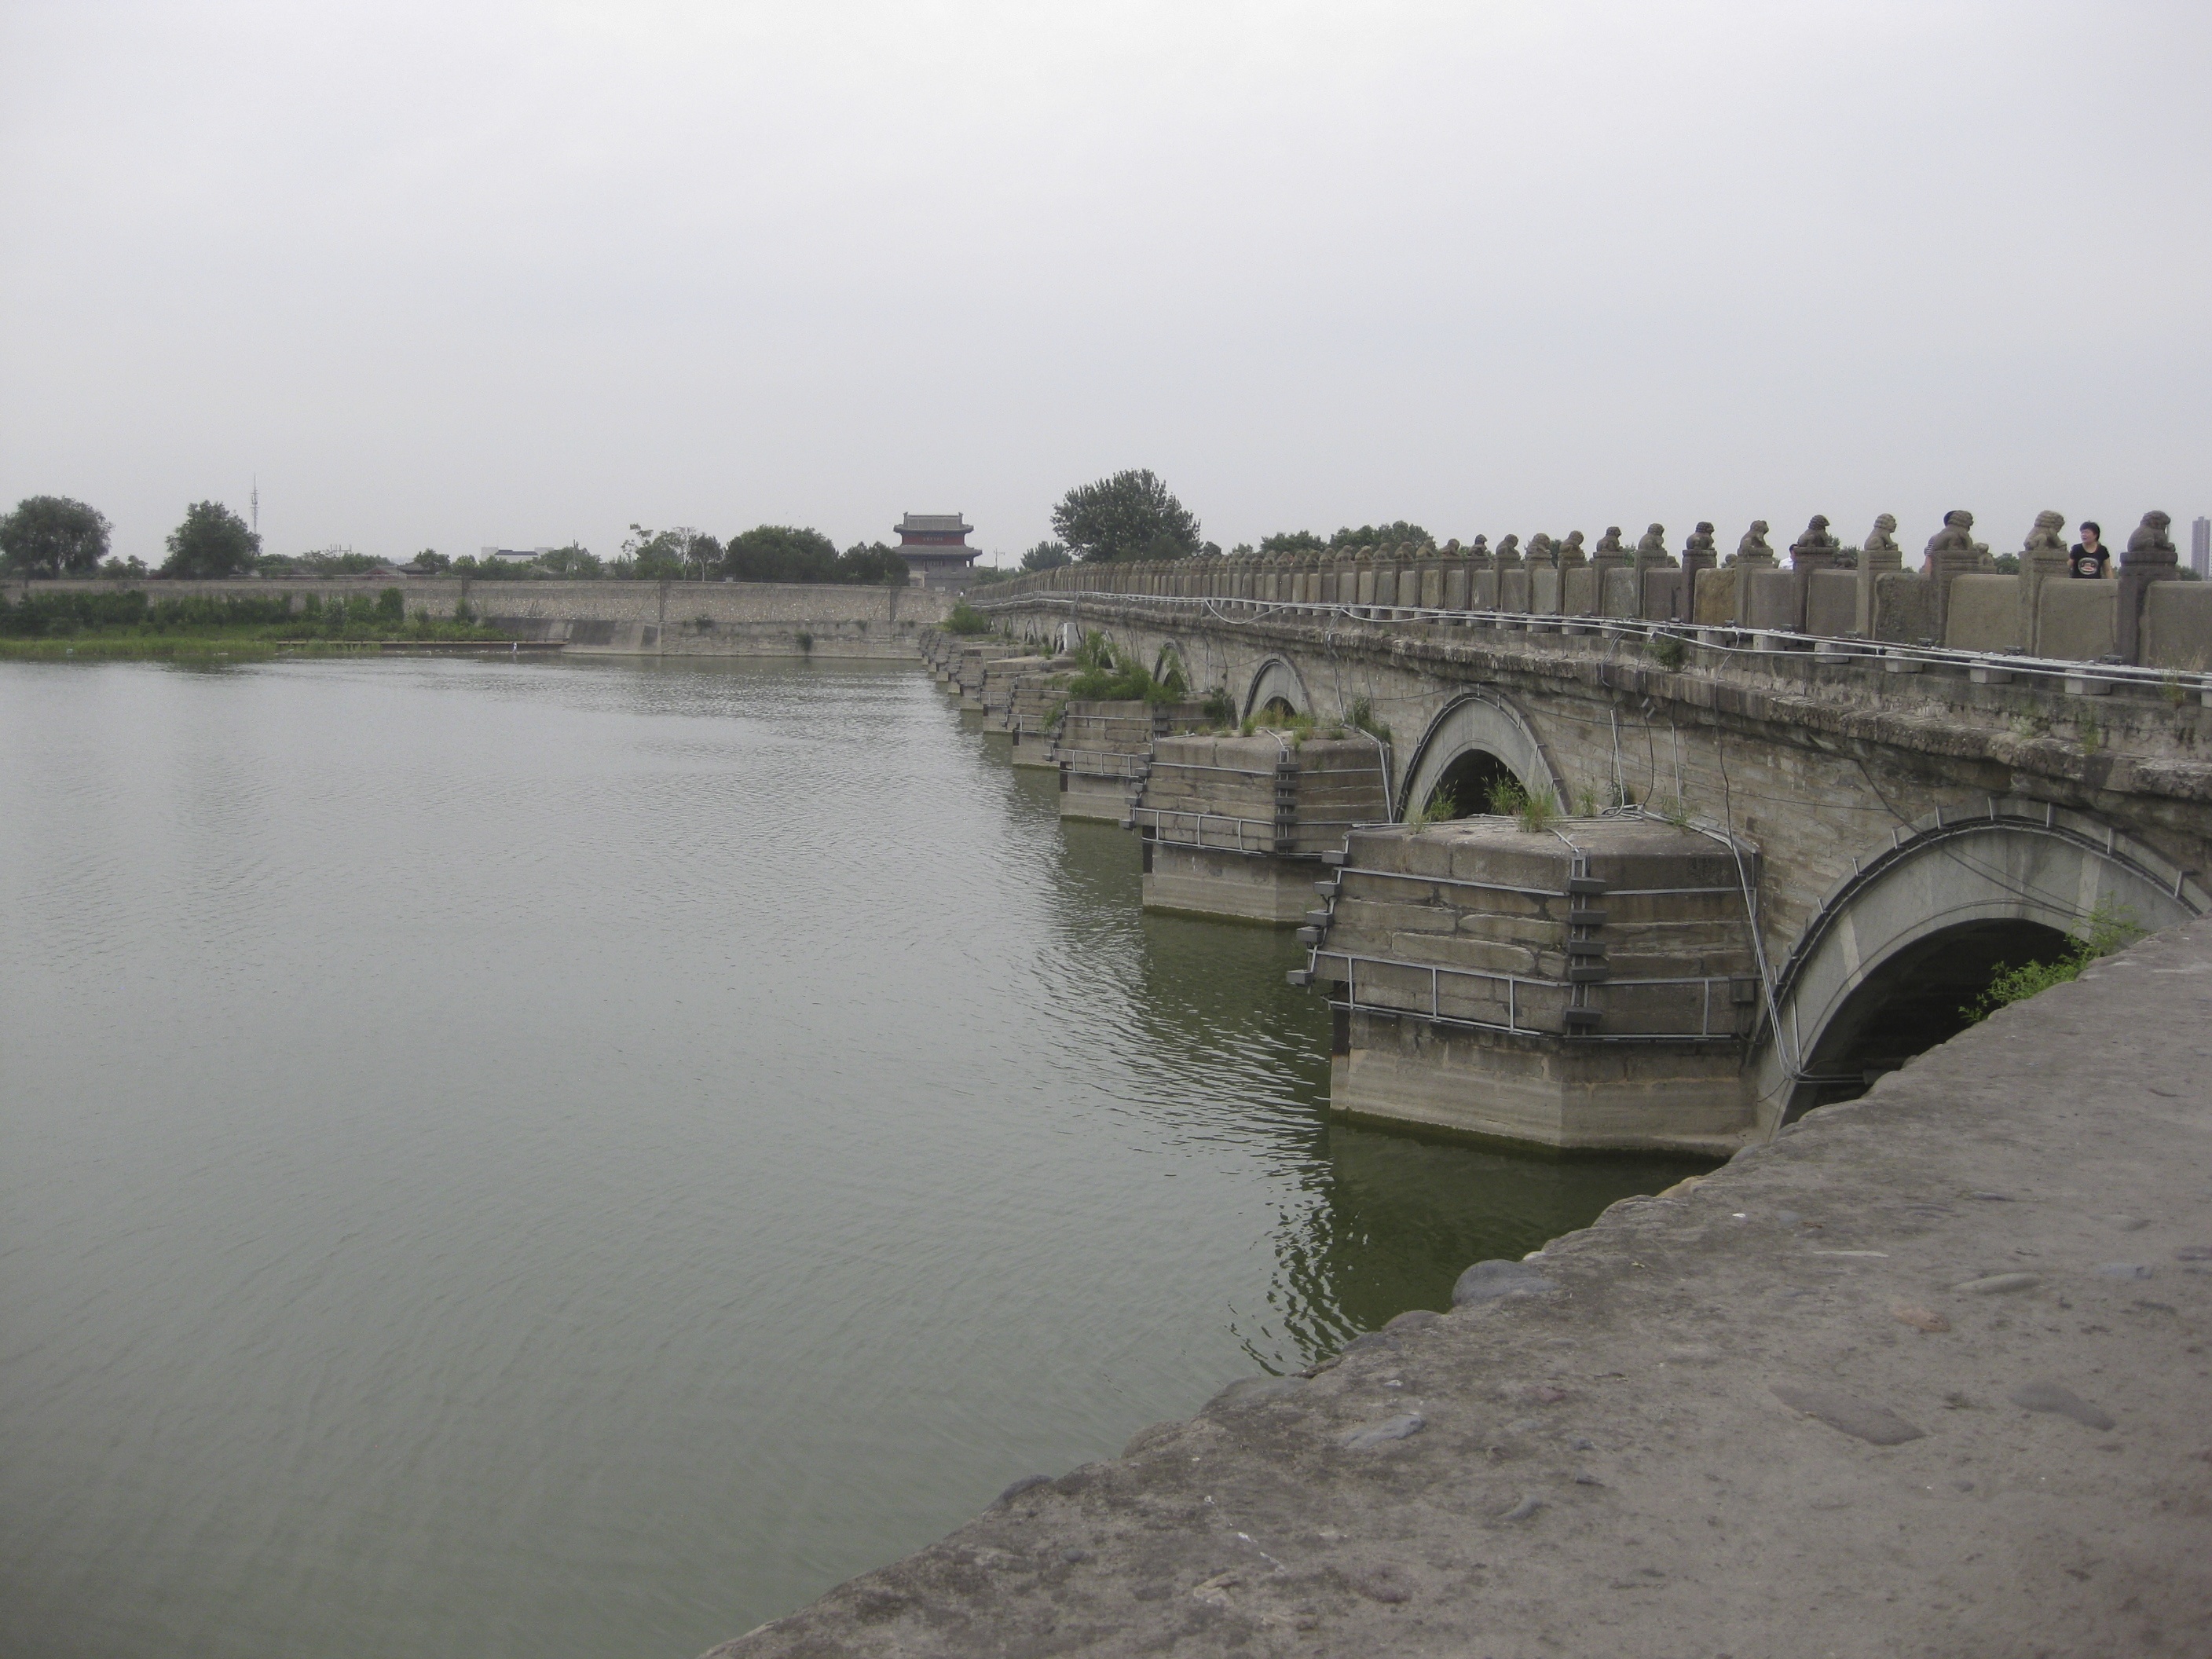 Upriver (north side) view of the Marco Polo Bridge, Yongding (Lugou) River, and Wanping’s West Gate tower. Source: Author’s Collection, 2014.